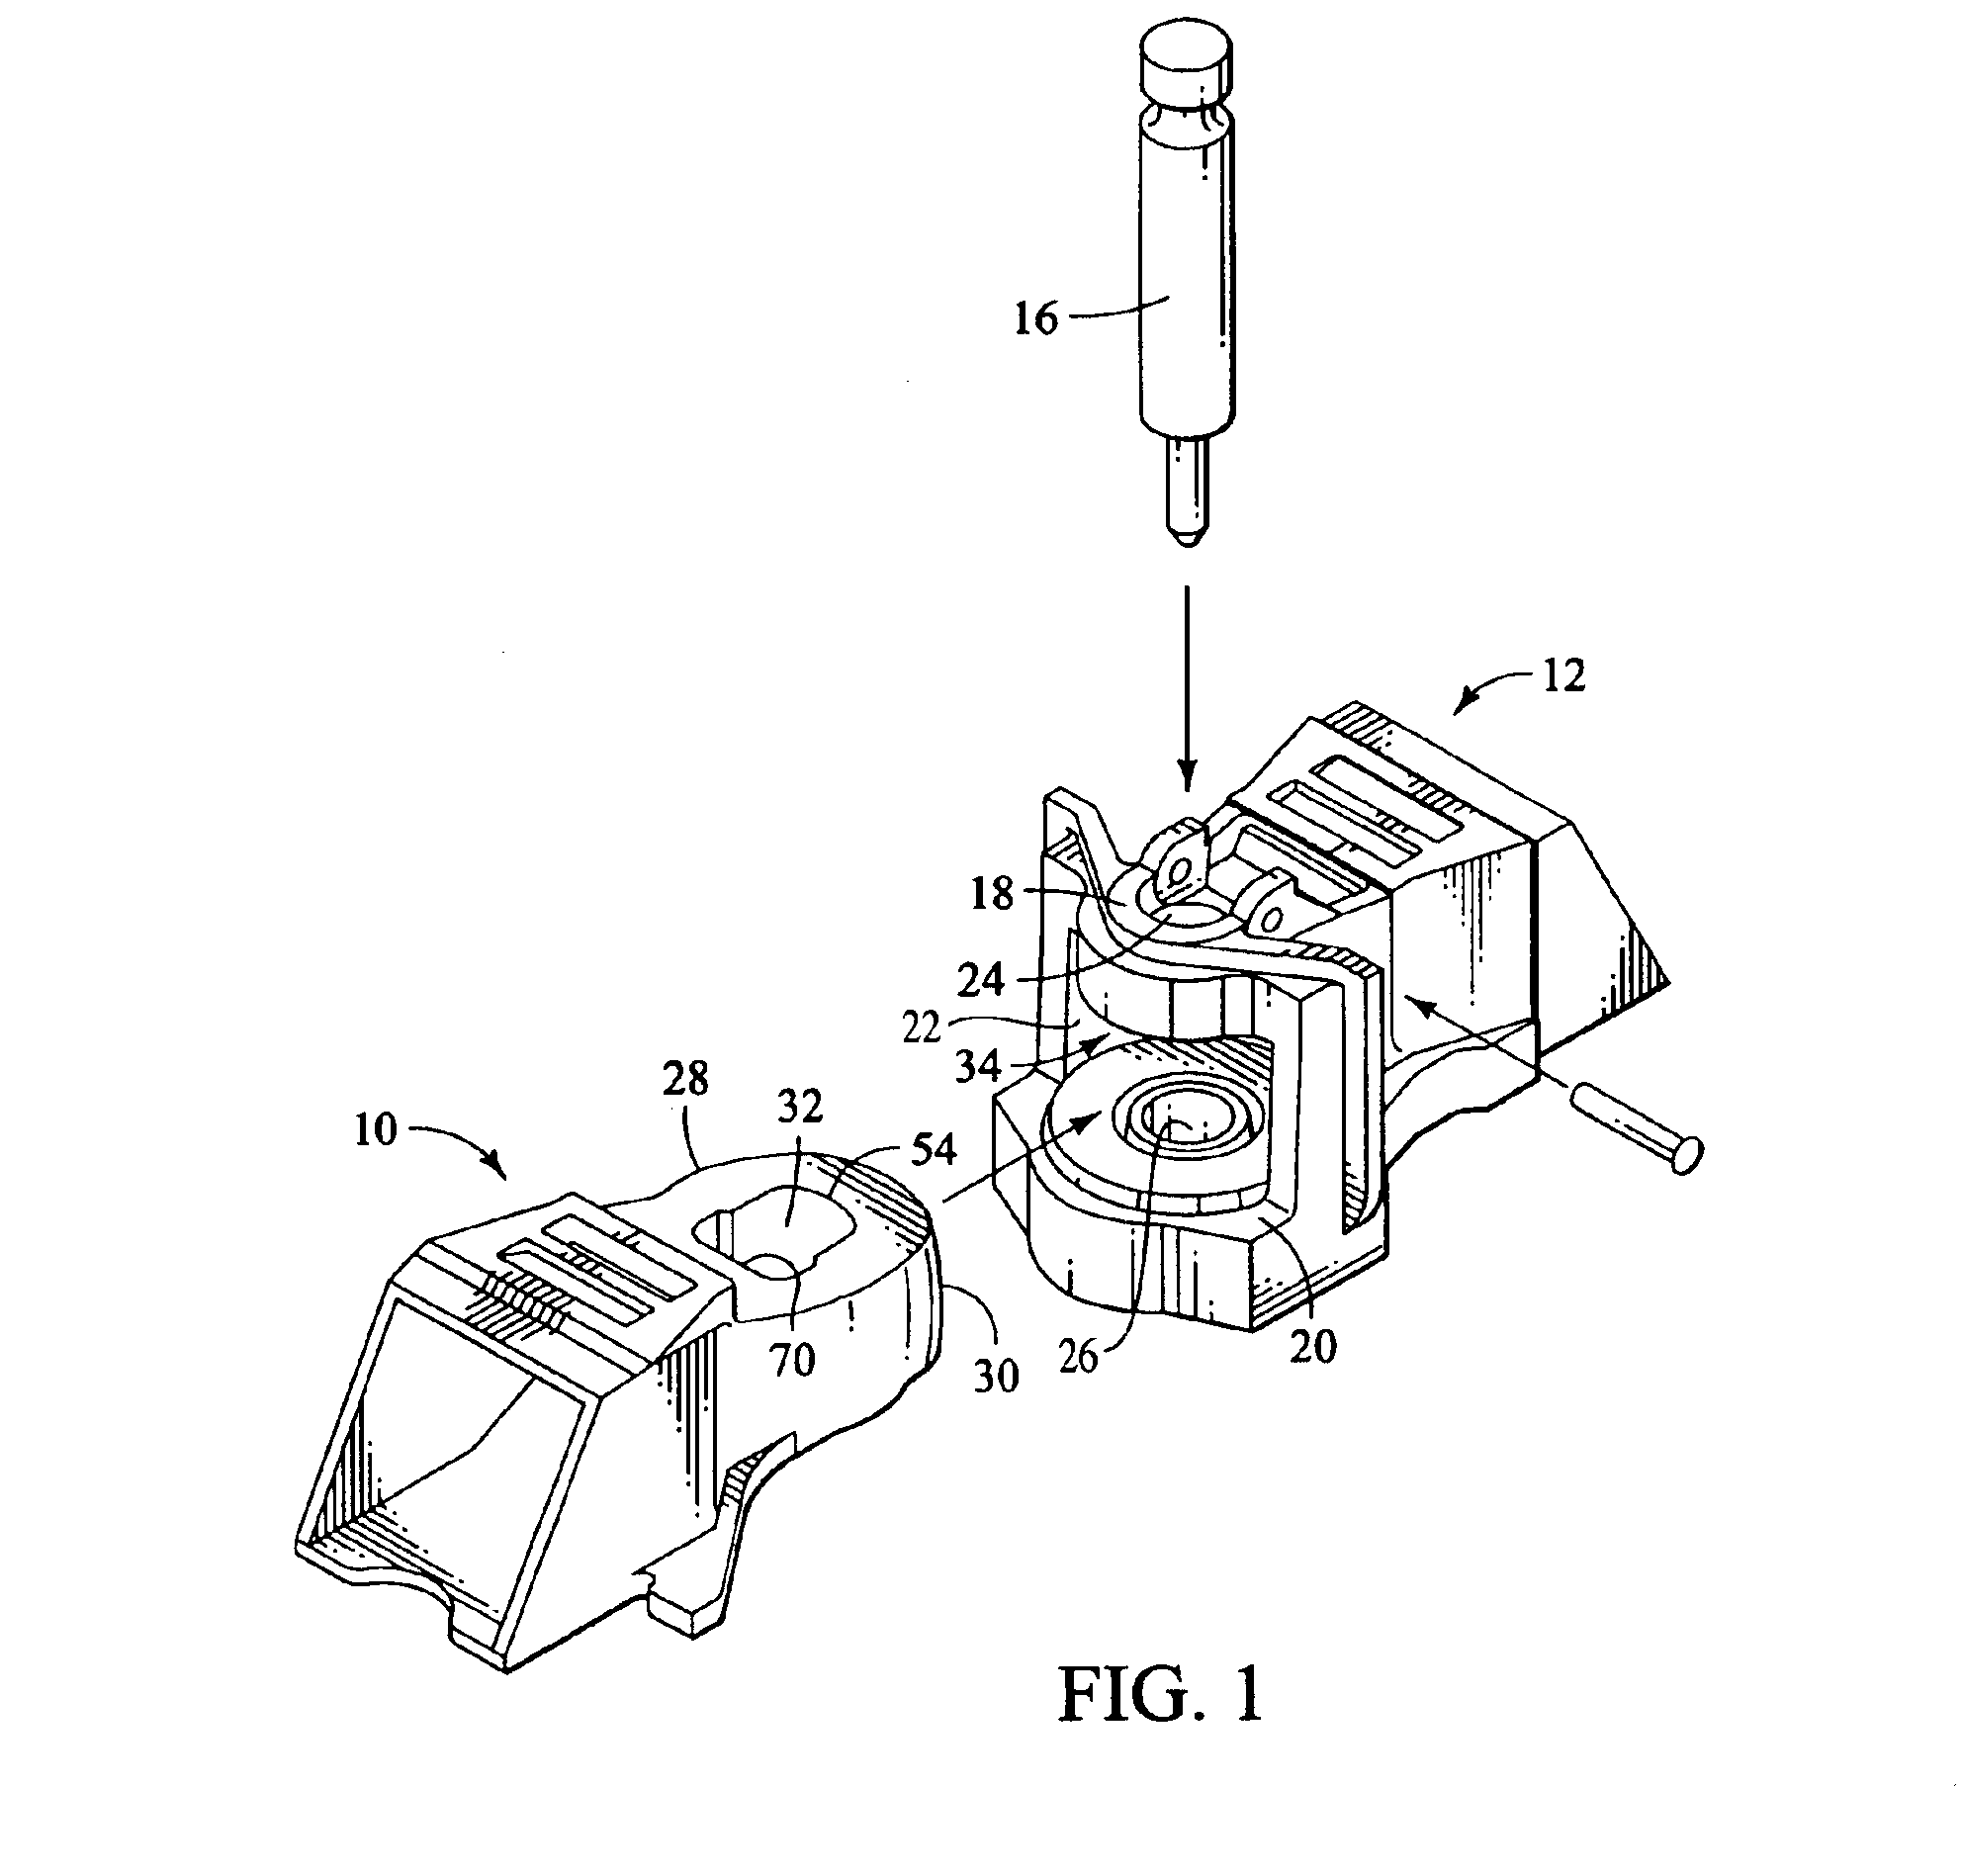 Articulated connector reconditioning process and apparatuses